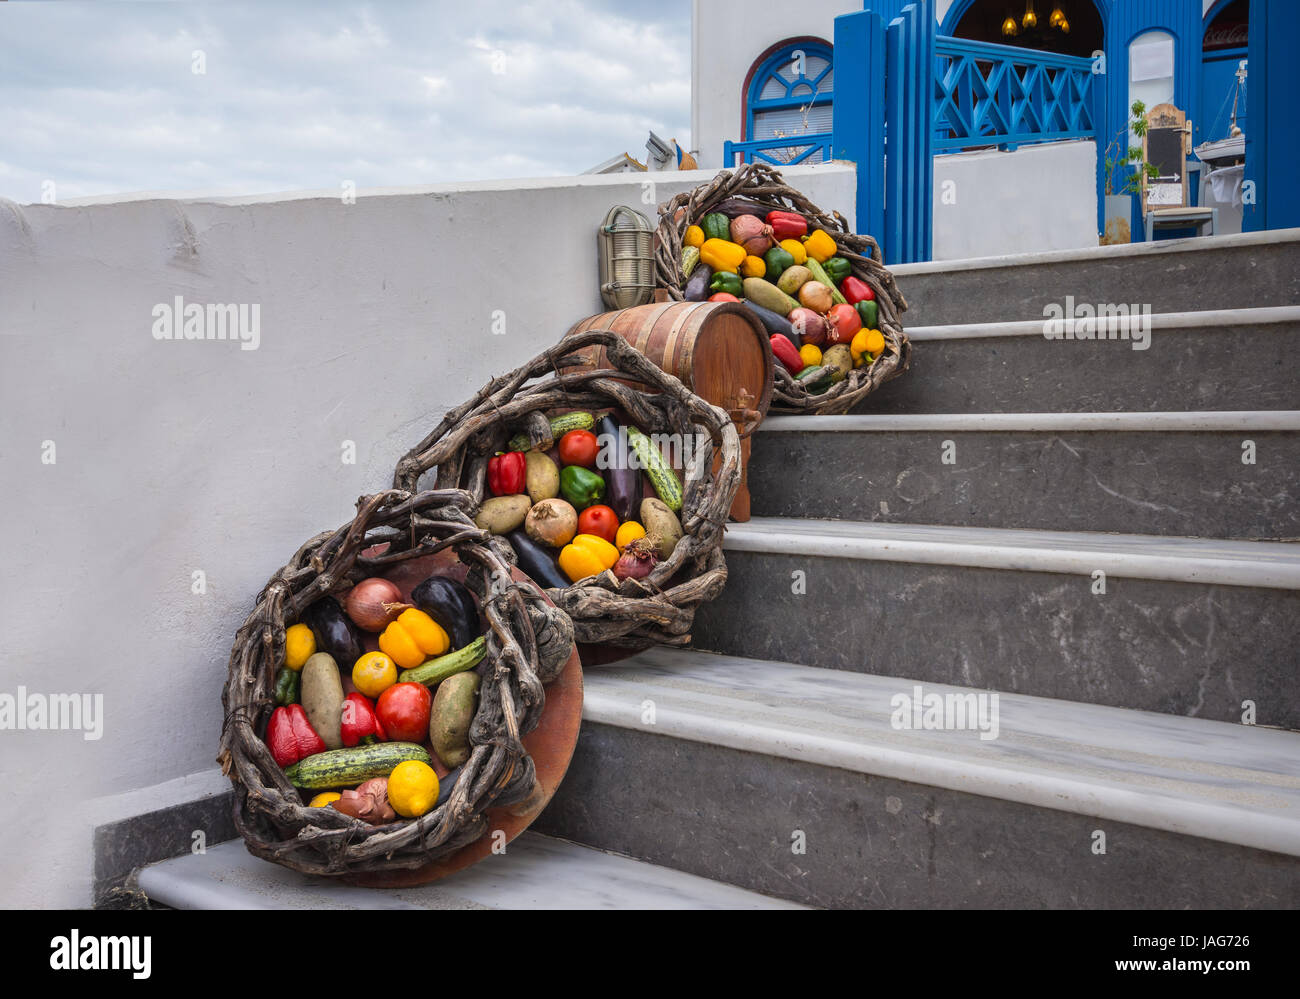 Baskets with fresh vegetables and fruits on a staircase, Fira, Santorini, Greece. Stock Photo